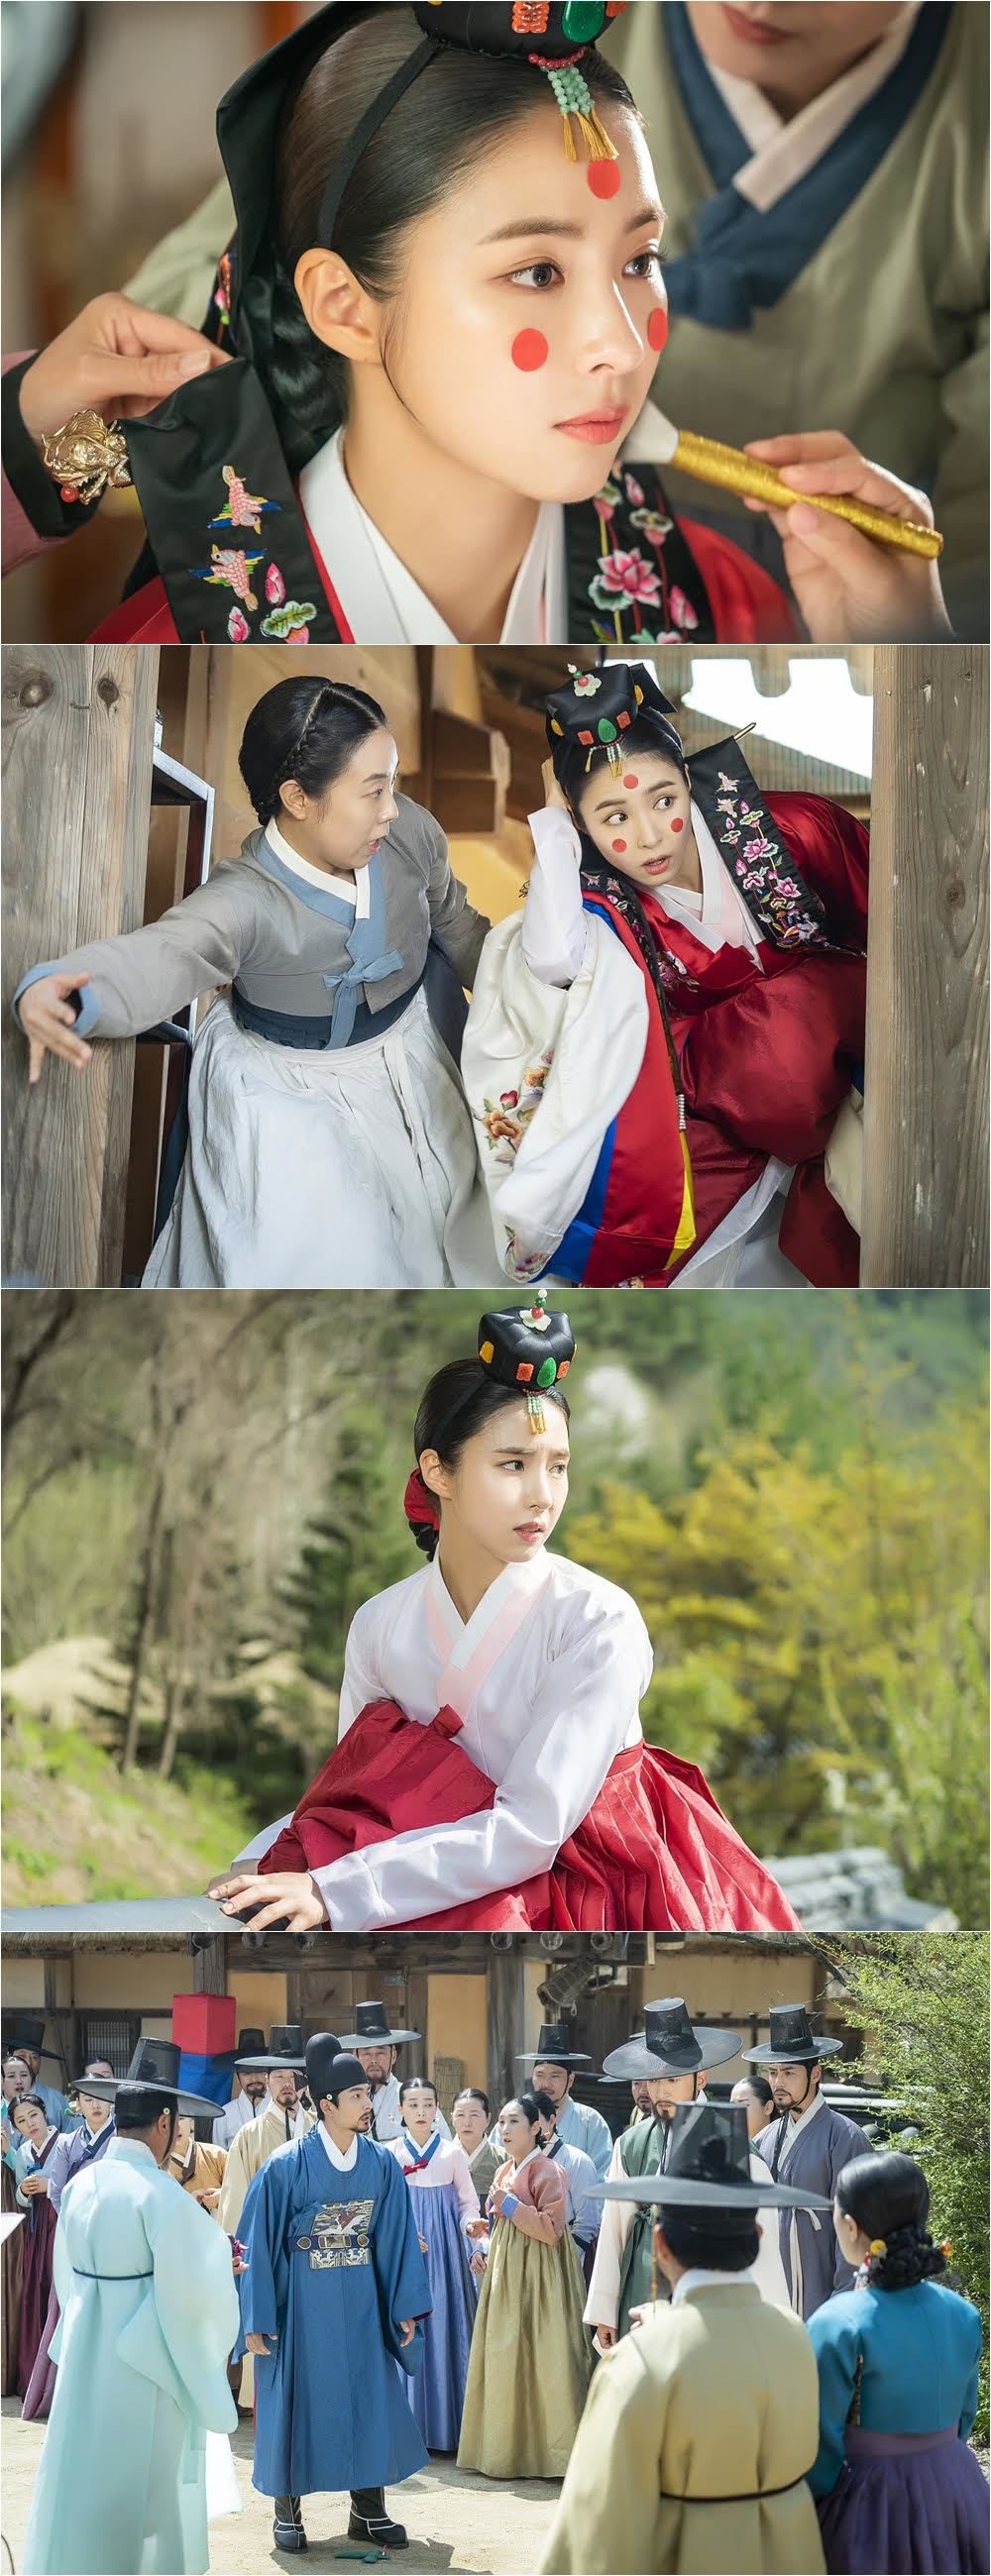 The MBC drama The New Entrepreneur, Gu Hae-ryeong released a steel showing Shin Se-kyung (Gu Hae-ryeong), who is trying to Esapce ahead of the wedding ceremony on the 18th.The photo shows Shin Se Kyung receiving a brides dress.Shin Se Kyung, who has taken a new bride visual with a patriarch and a traditional wedding dress, is dressed with a soulless look rather than a happy smile.It is then moving in secret with the help of body-breathing brewers (soldiers).Her head is sneaking out of the back door, not the wedding ceremony, and she wonders what the two are up to.Especially, Shin Se Kyung, who threw off his wedding dress, shows a hesitated eye just before he jumped on the wall.I wonder why she is trying to get out of the wedding ceremony and what she is hesitating about.Seo Young-joo (Lee Seung-hoon), who wore a wife and wore a blue wedding dress, and Shin Se-kyungs brother, Gong Jeong-hwan (Koo Jae-kyung), are both shocked and unable to speak.The new officer, Hae-ryong, said Shin Se-kyung, will Esapce ahead of the wedding ceremony.I hope you will confirm through this broadcast whether her Operationss will be successful and what results will be. The third and fourth episodes of the Phil Chungman romance annals The New Entrepreneur Gu Hae-ryeong by Shin Se-kyung, the first problematic woman of Joseon, and Cha Eun-woo (Lee Rim), the Prince of the anti-war Motae Solo, will be broadcast today at 8:55 p.m.